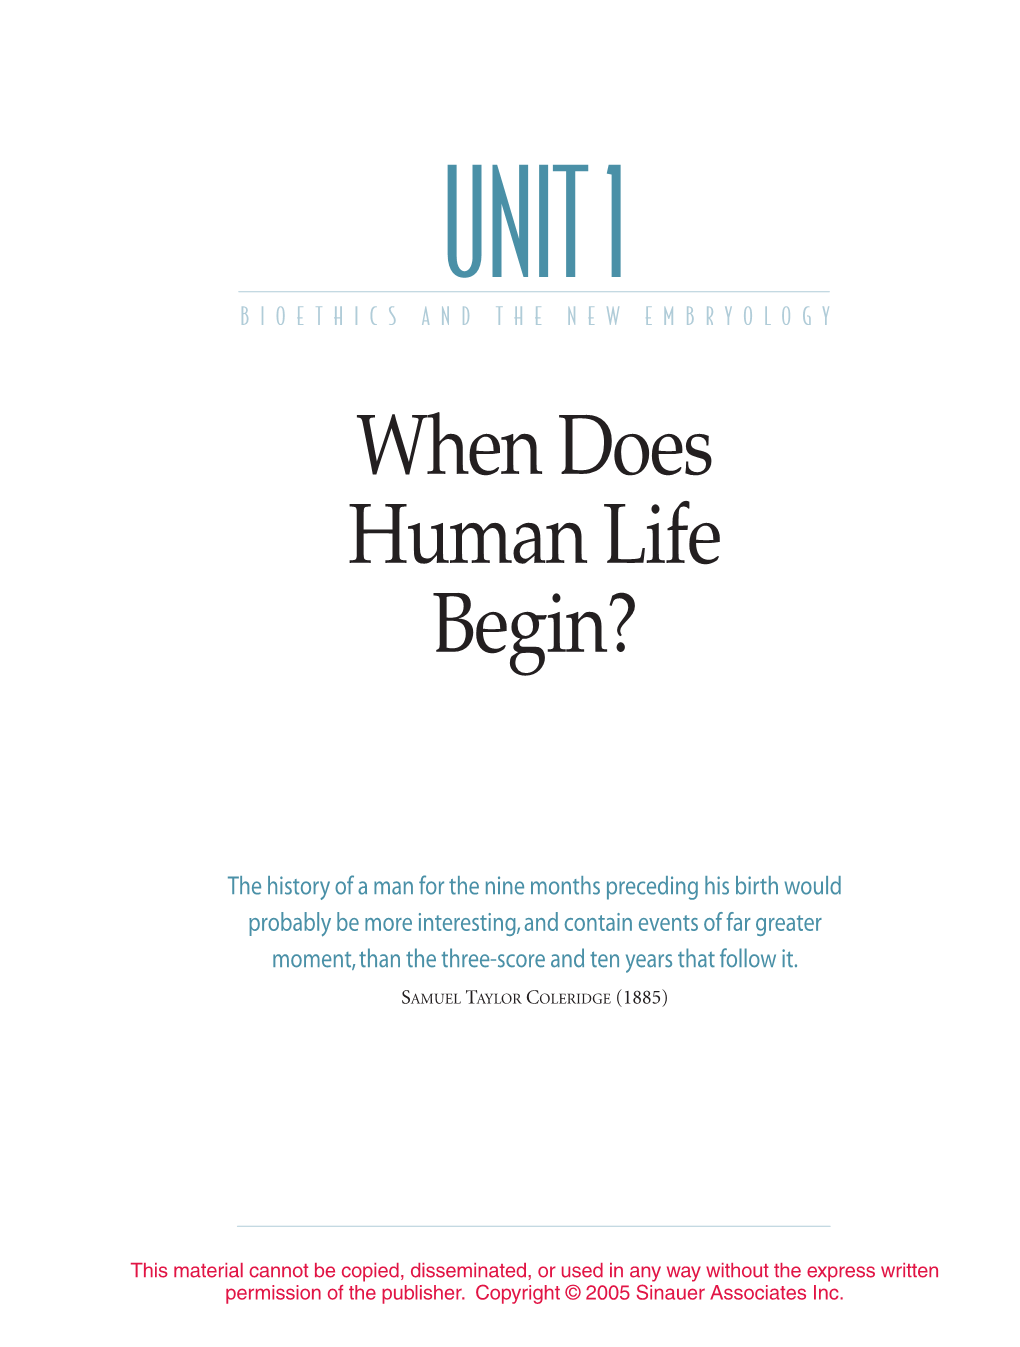 When Does Human Life Begin?